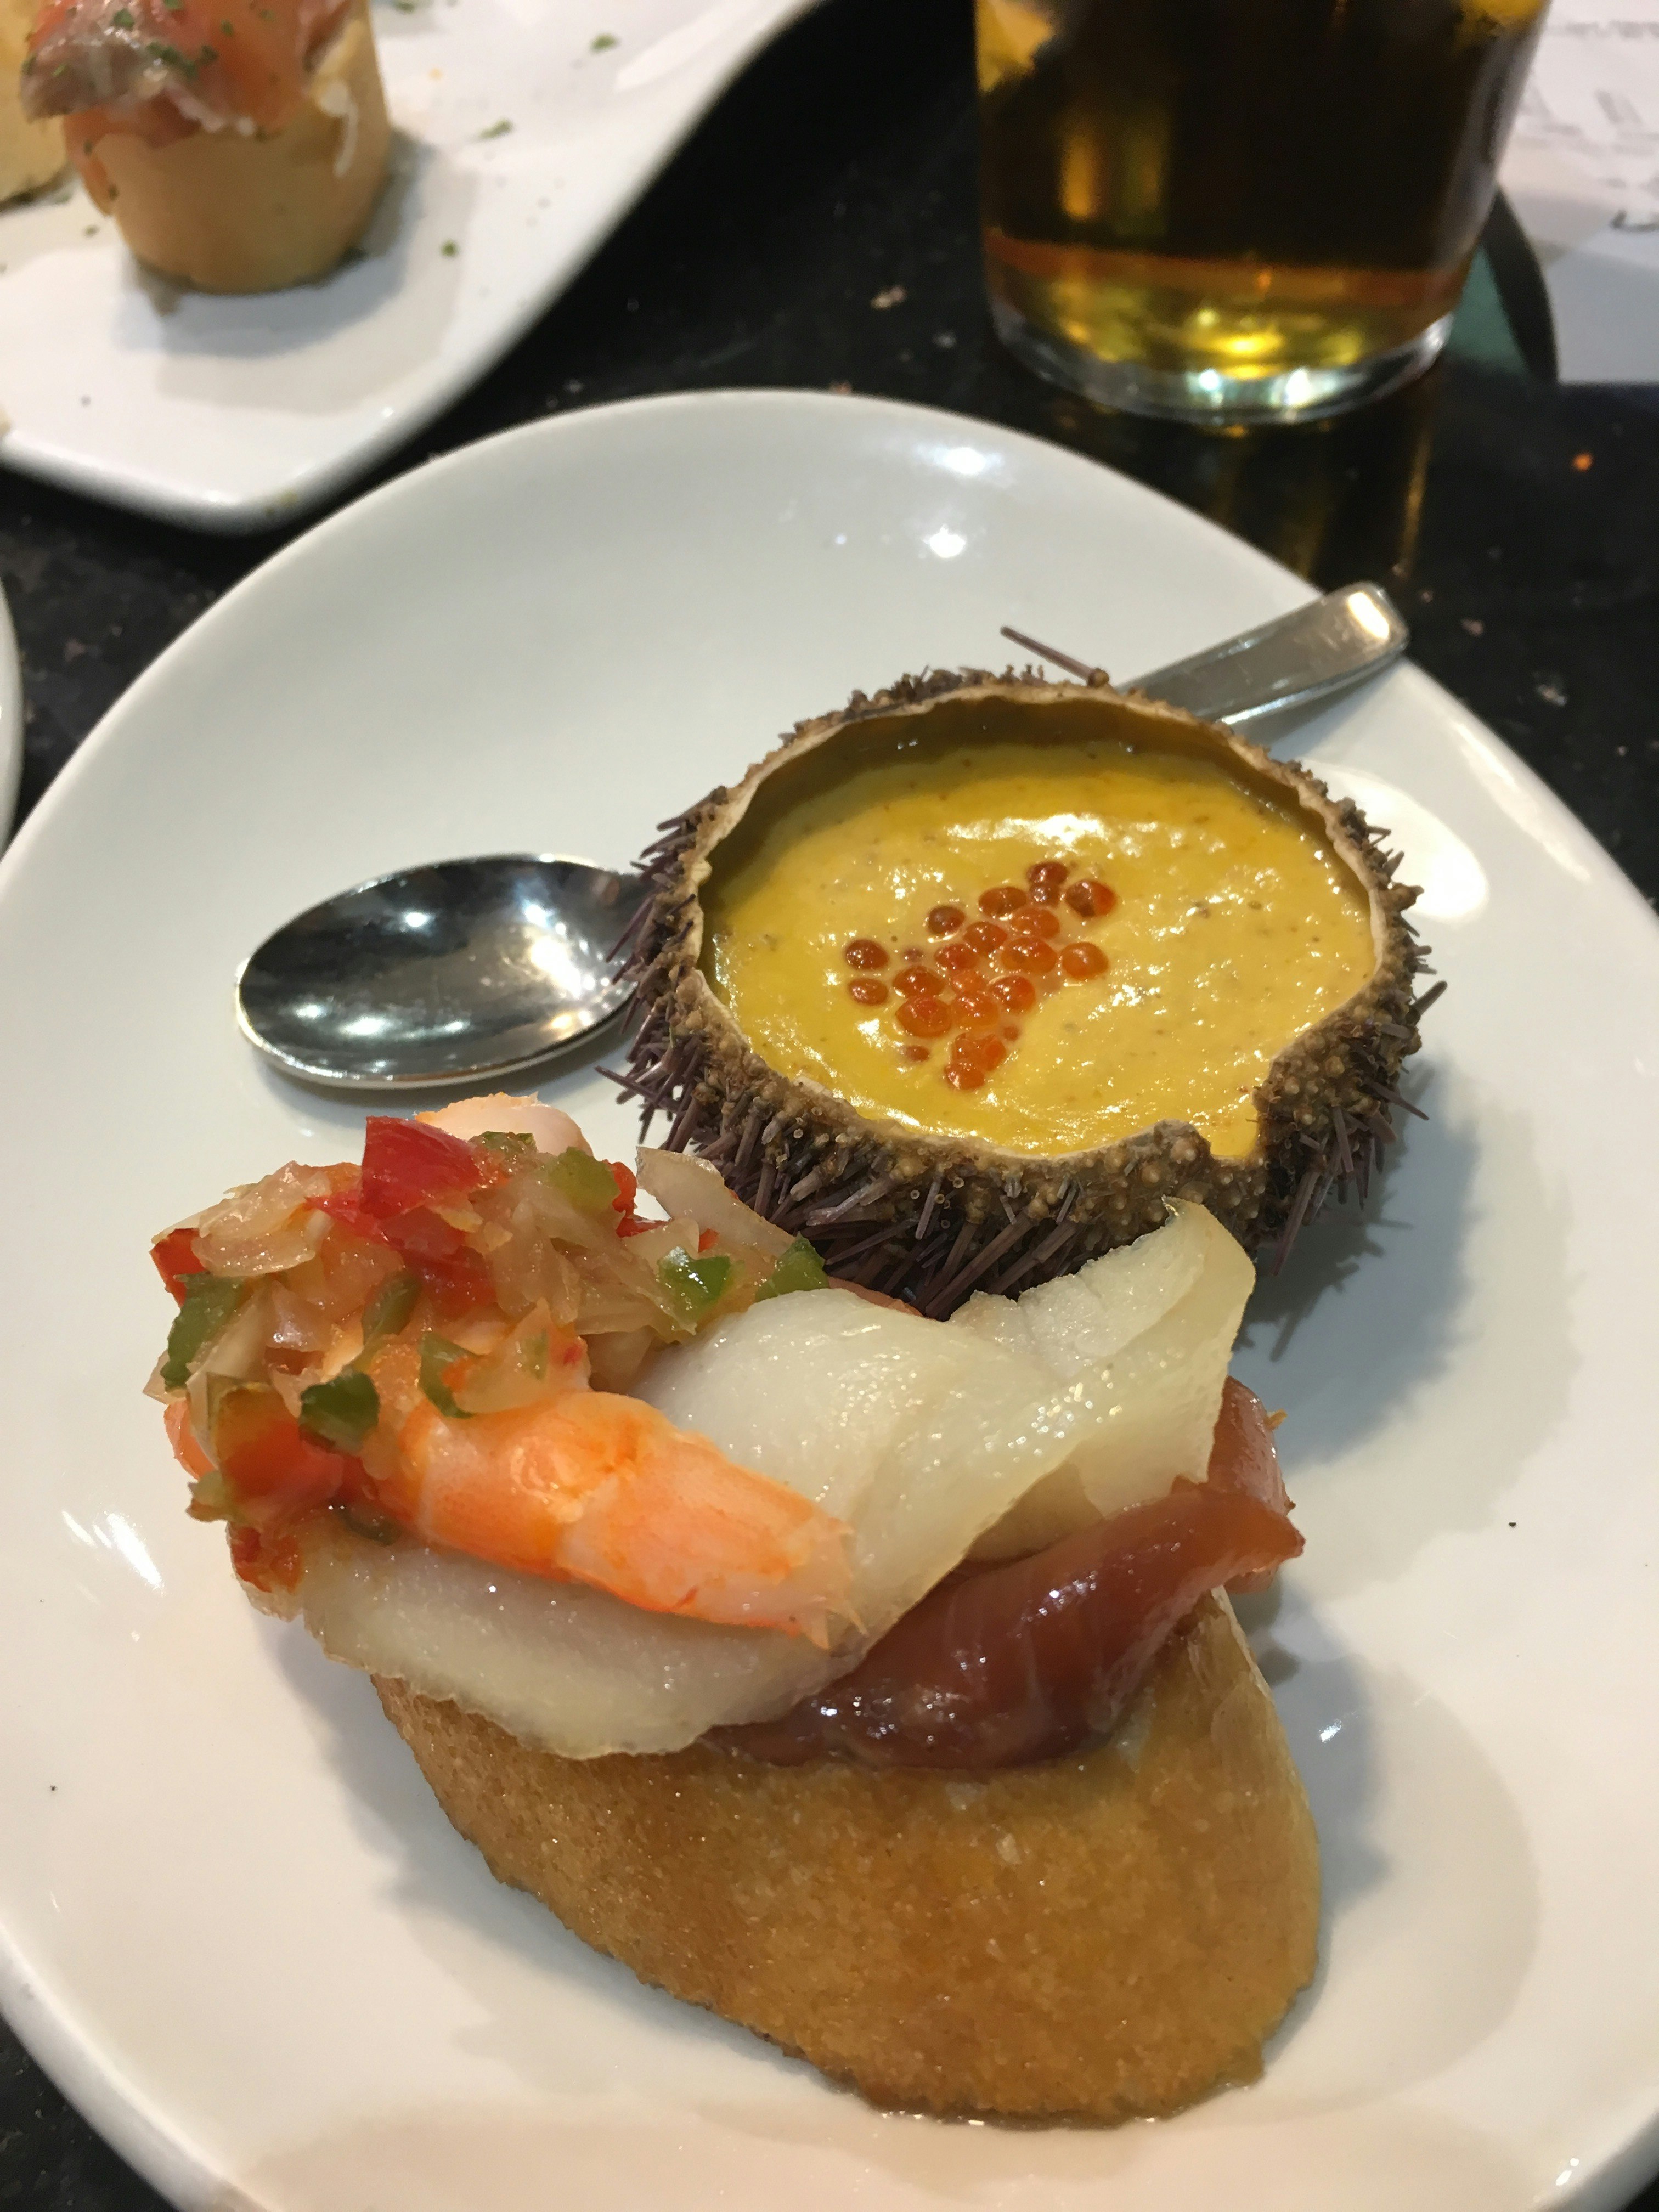 A creamy yellow soup is served inside a sea urchin husk and sprinkled with orange caviar. It sits next to a fried potato wedge topped with shrimp, raw fish, and marinated peppers – an example of pintxos in San Sebastian